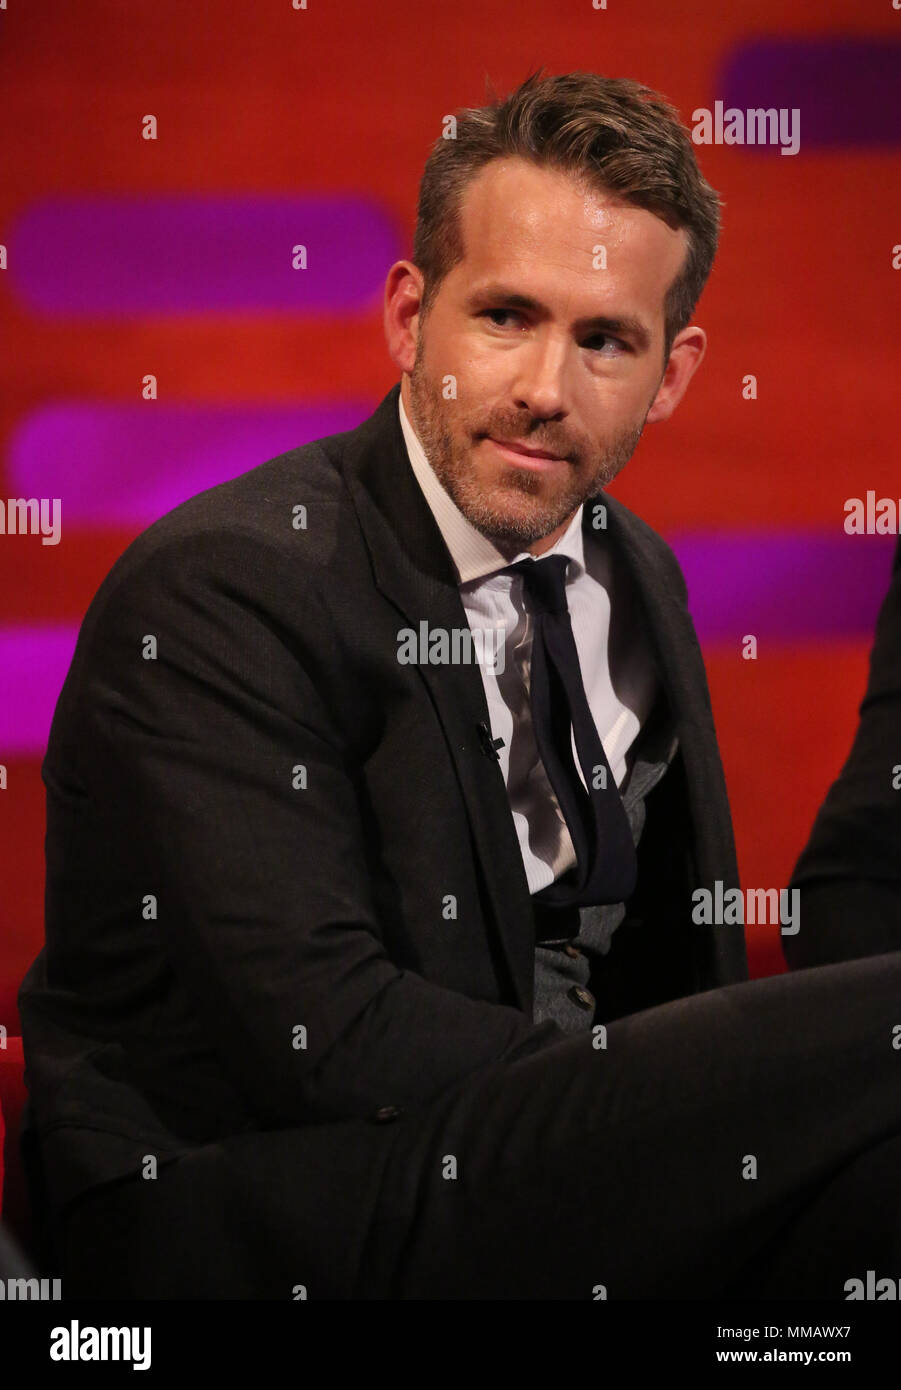 https://c8.alamy.com/comp/MMAWX7/ryan-reynolds-during-filming-for-the-graham-norton-show-at-bbc-studioworks-in-london-to-be-aired-on-bbc-one-on-friday-press-association-picture-date-thursday-may-10-2018-photo-credit-should-read-pa-images-on-behalf-of-so-tv-MMAWX7.jpg